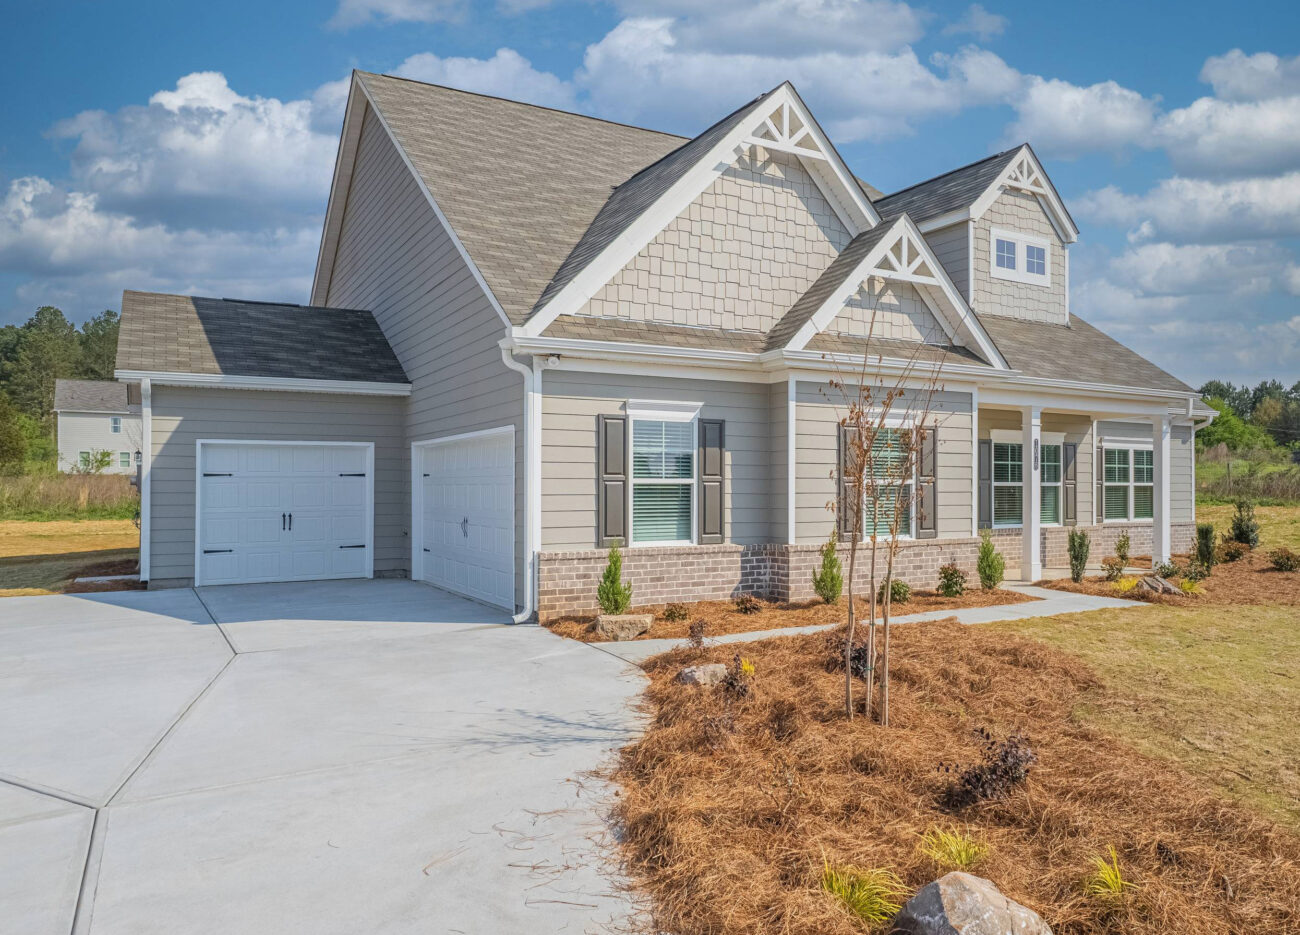 a new construction home built by Direct Residential Communities, covered with Quality Builders Warranty